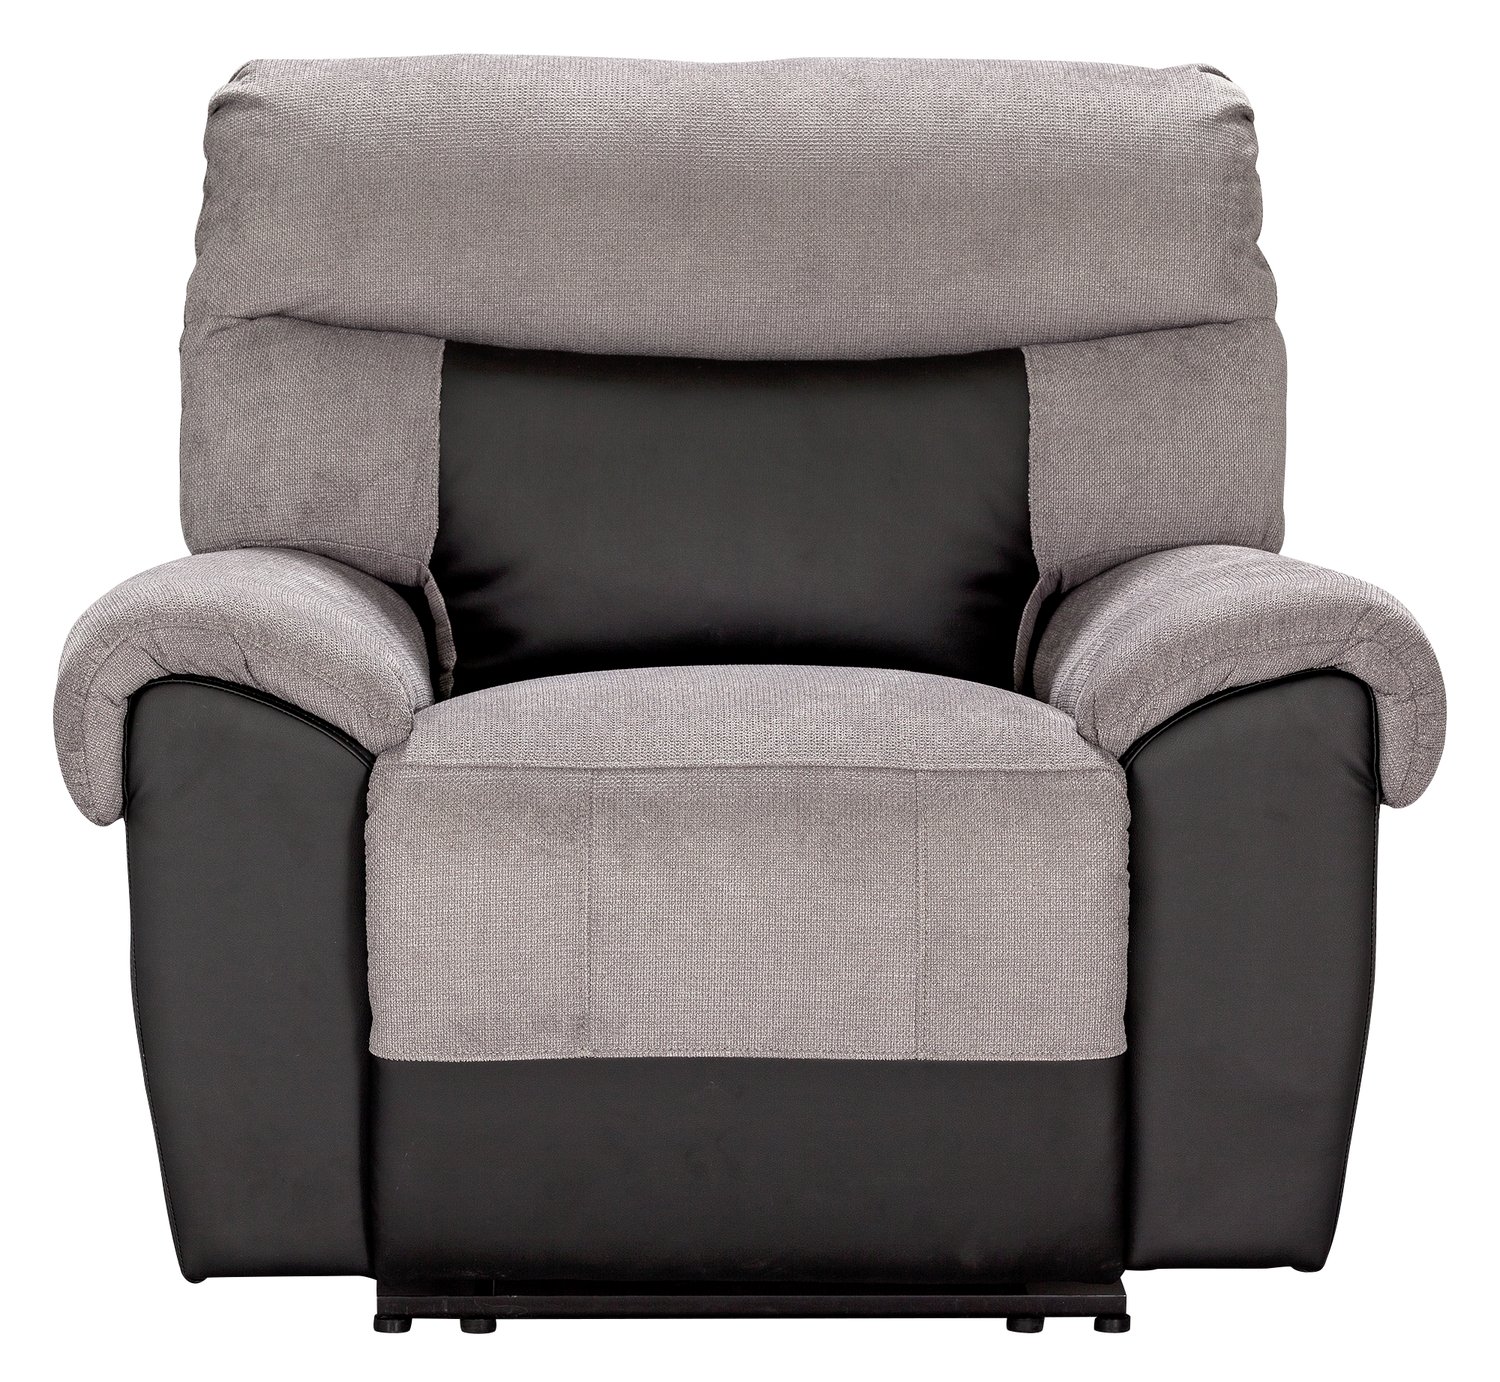 Argos Home Henry Fabric Recliner Chair - Charcoal